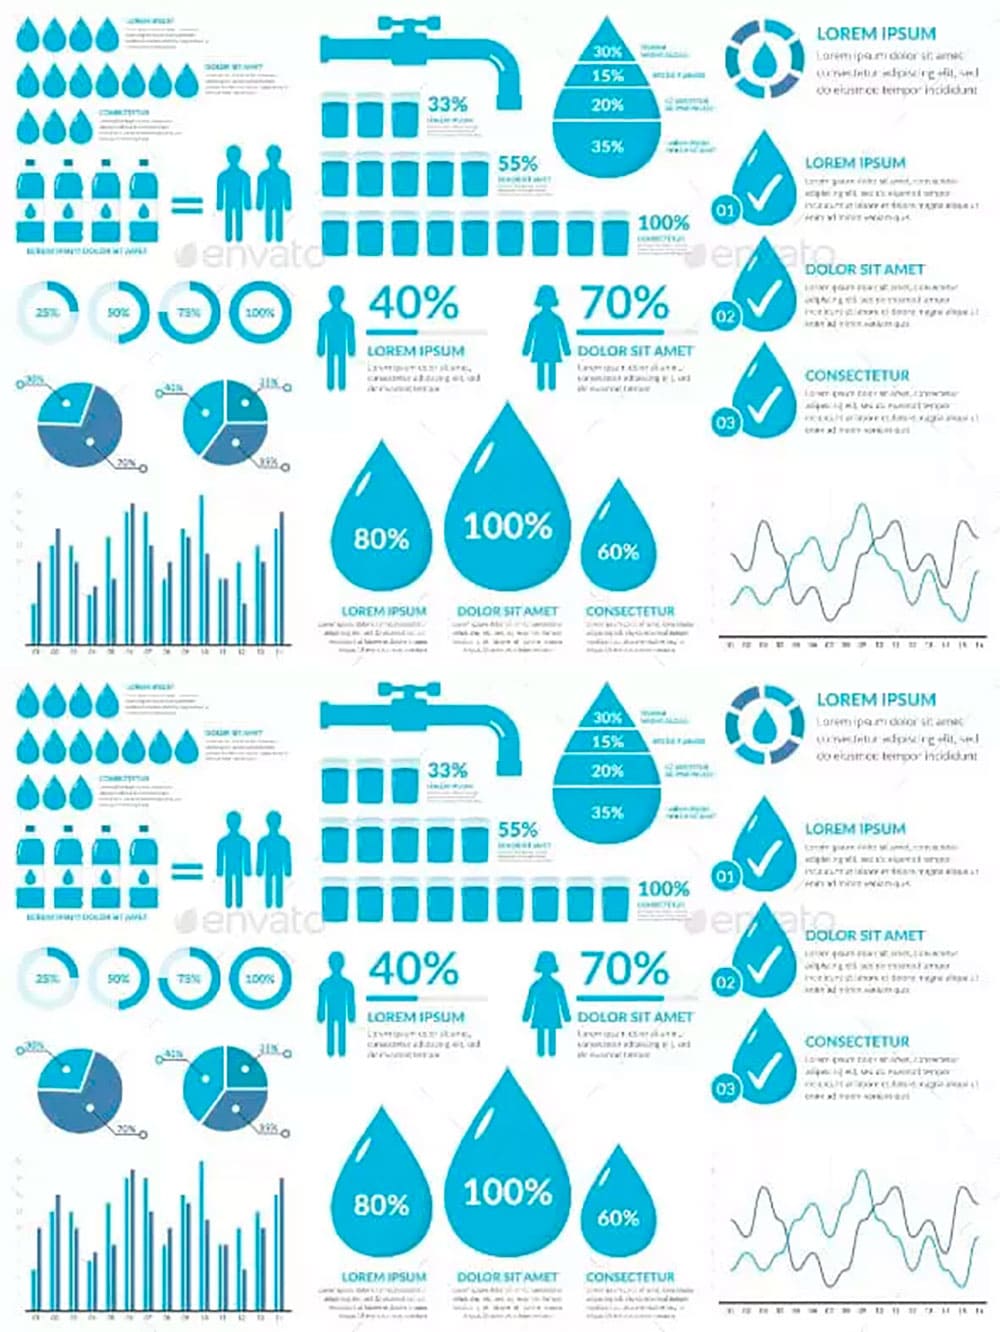 Water infographics 990, picture for pinterest.